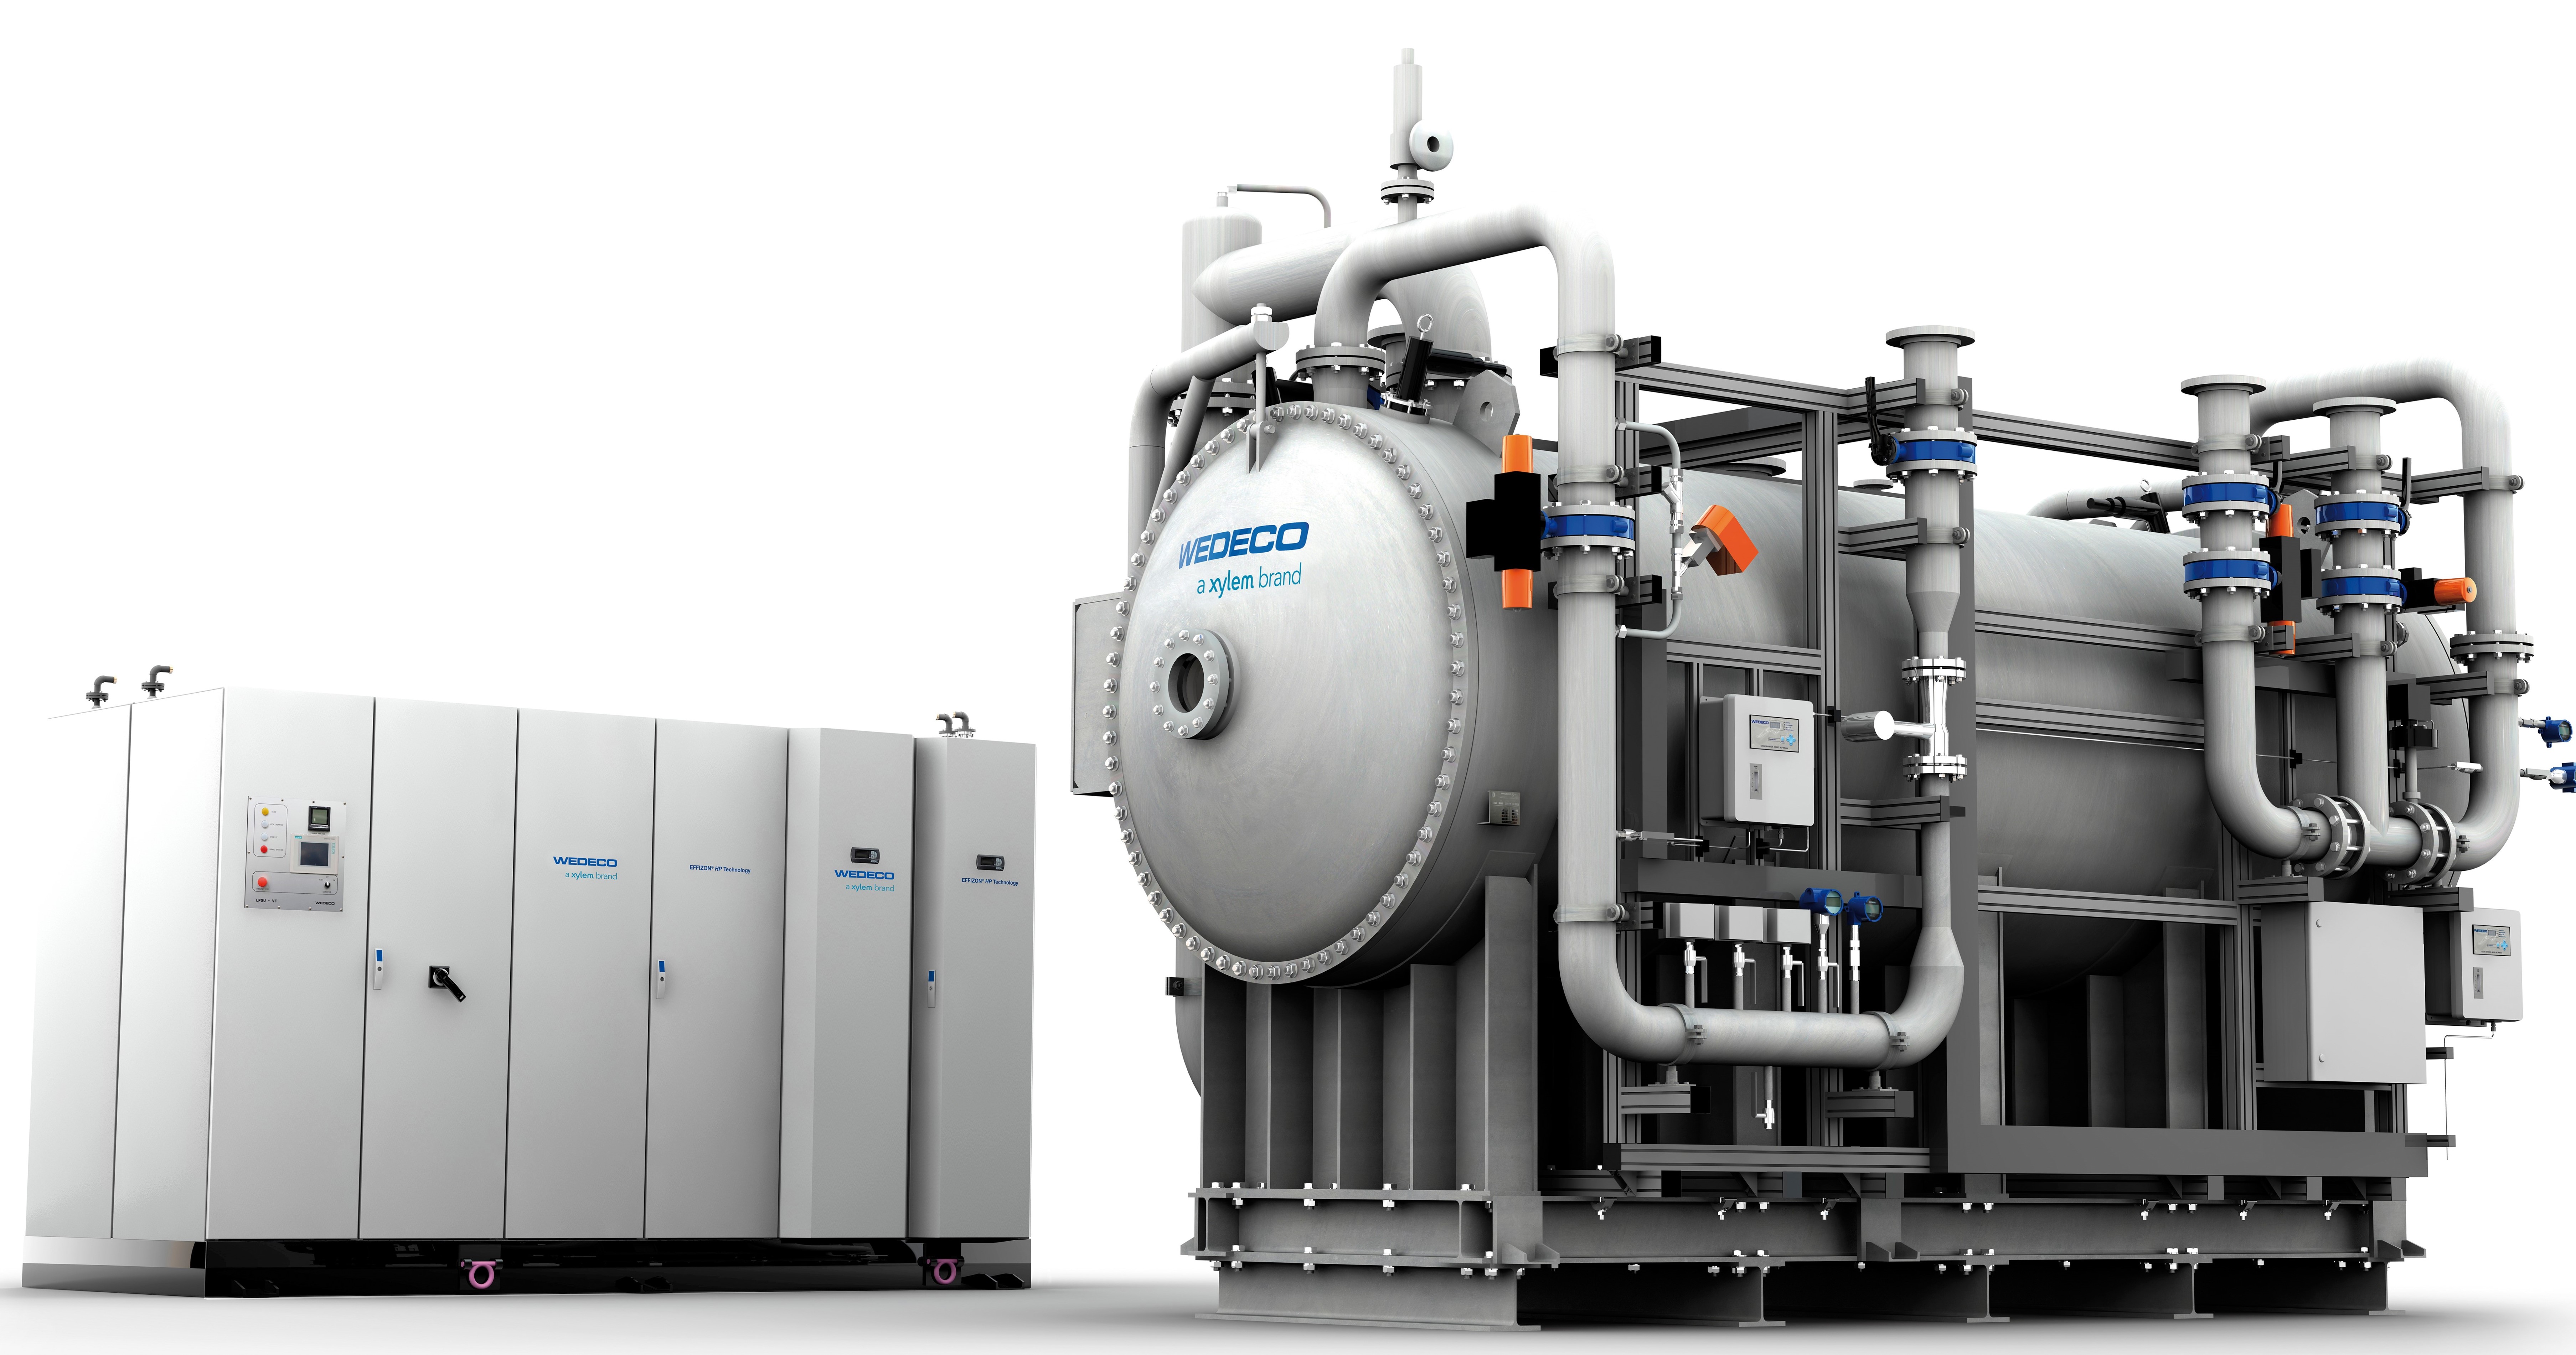 Xylem's Wedeco ozone technology will help Renewcell’s new mill produce dissolving pulp with a limited amount of chemicals, while also meeting the strictest local environmental regulations.